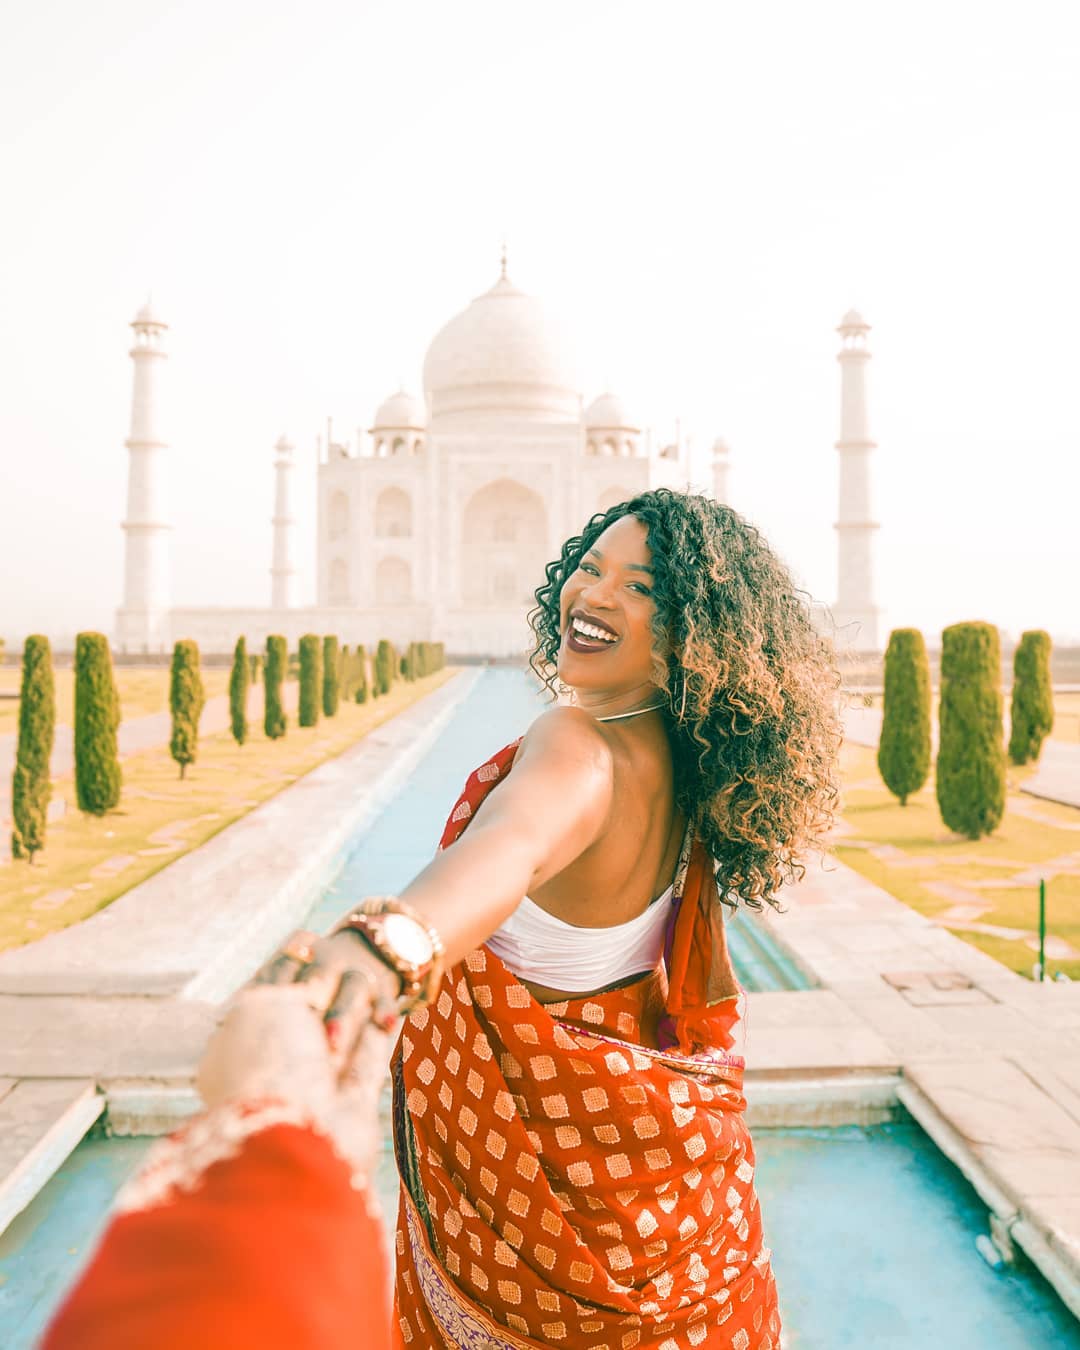 Influencer holding hands with man in front of Taj Mahal. Photo by Instagram user @glographics